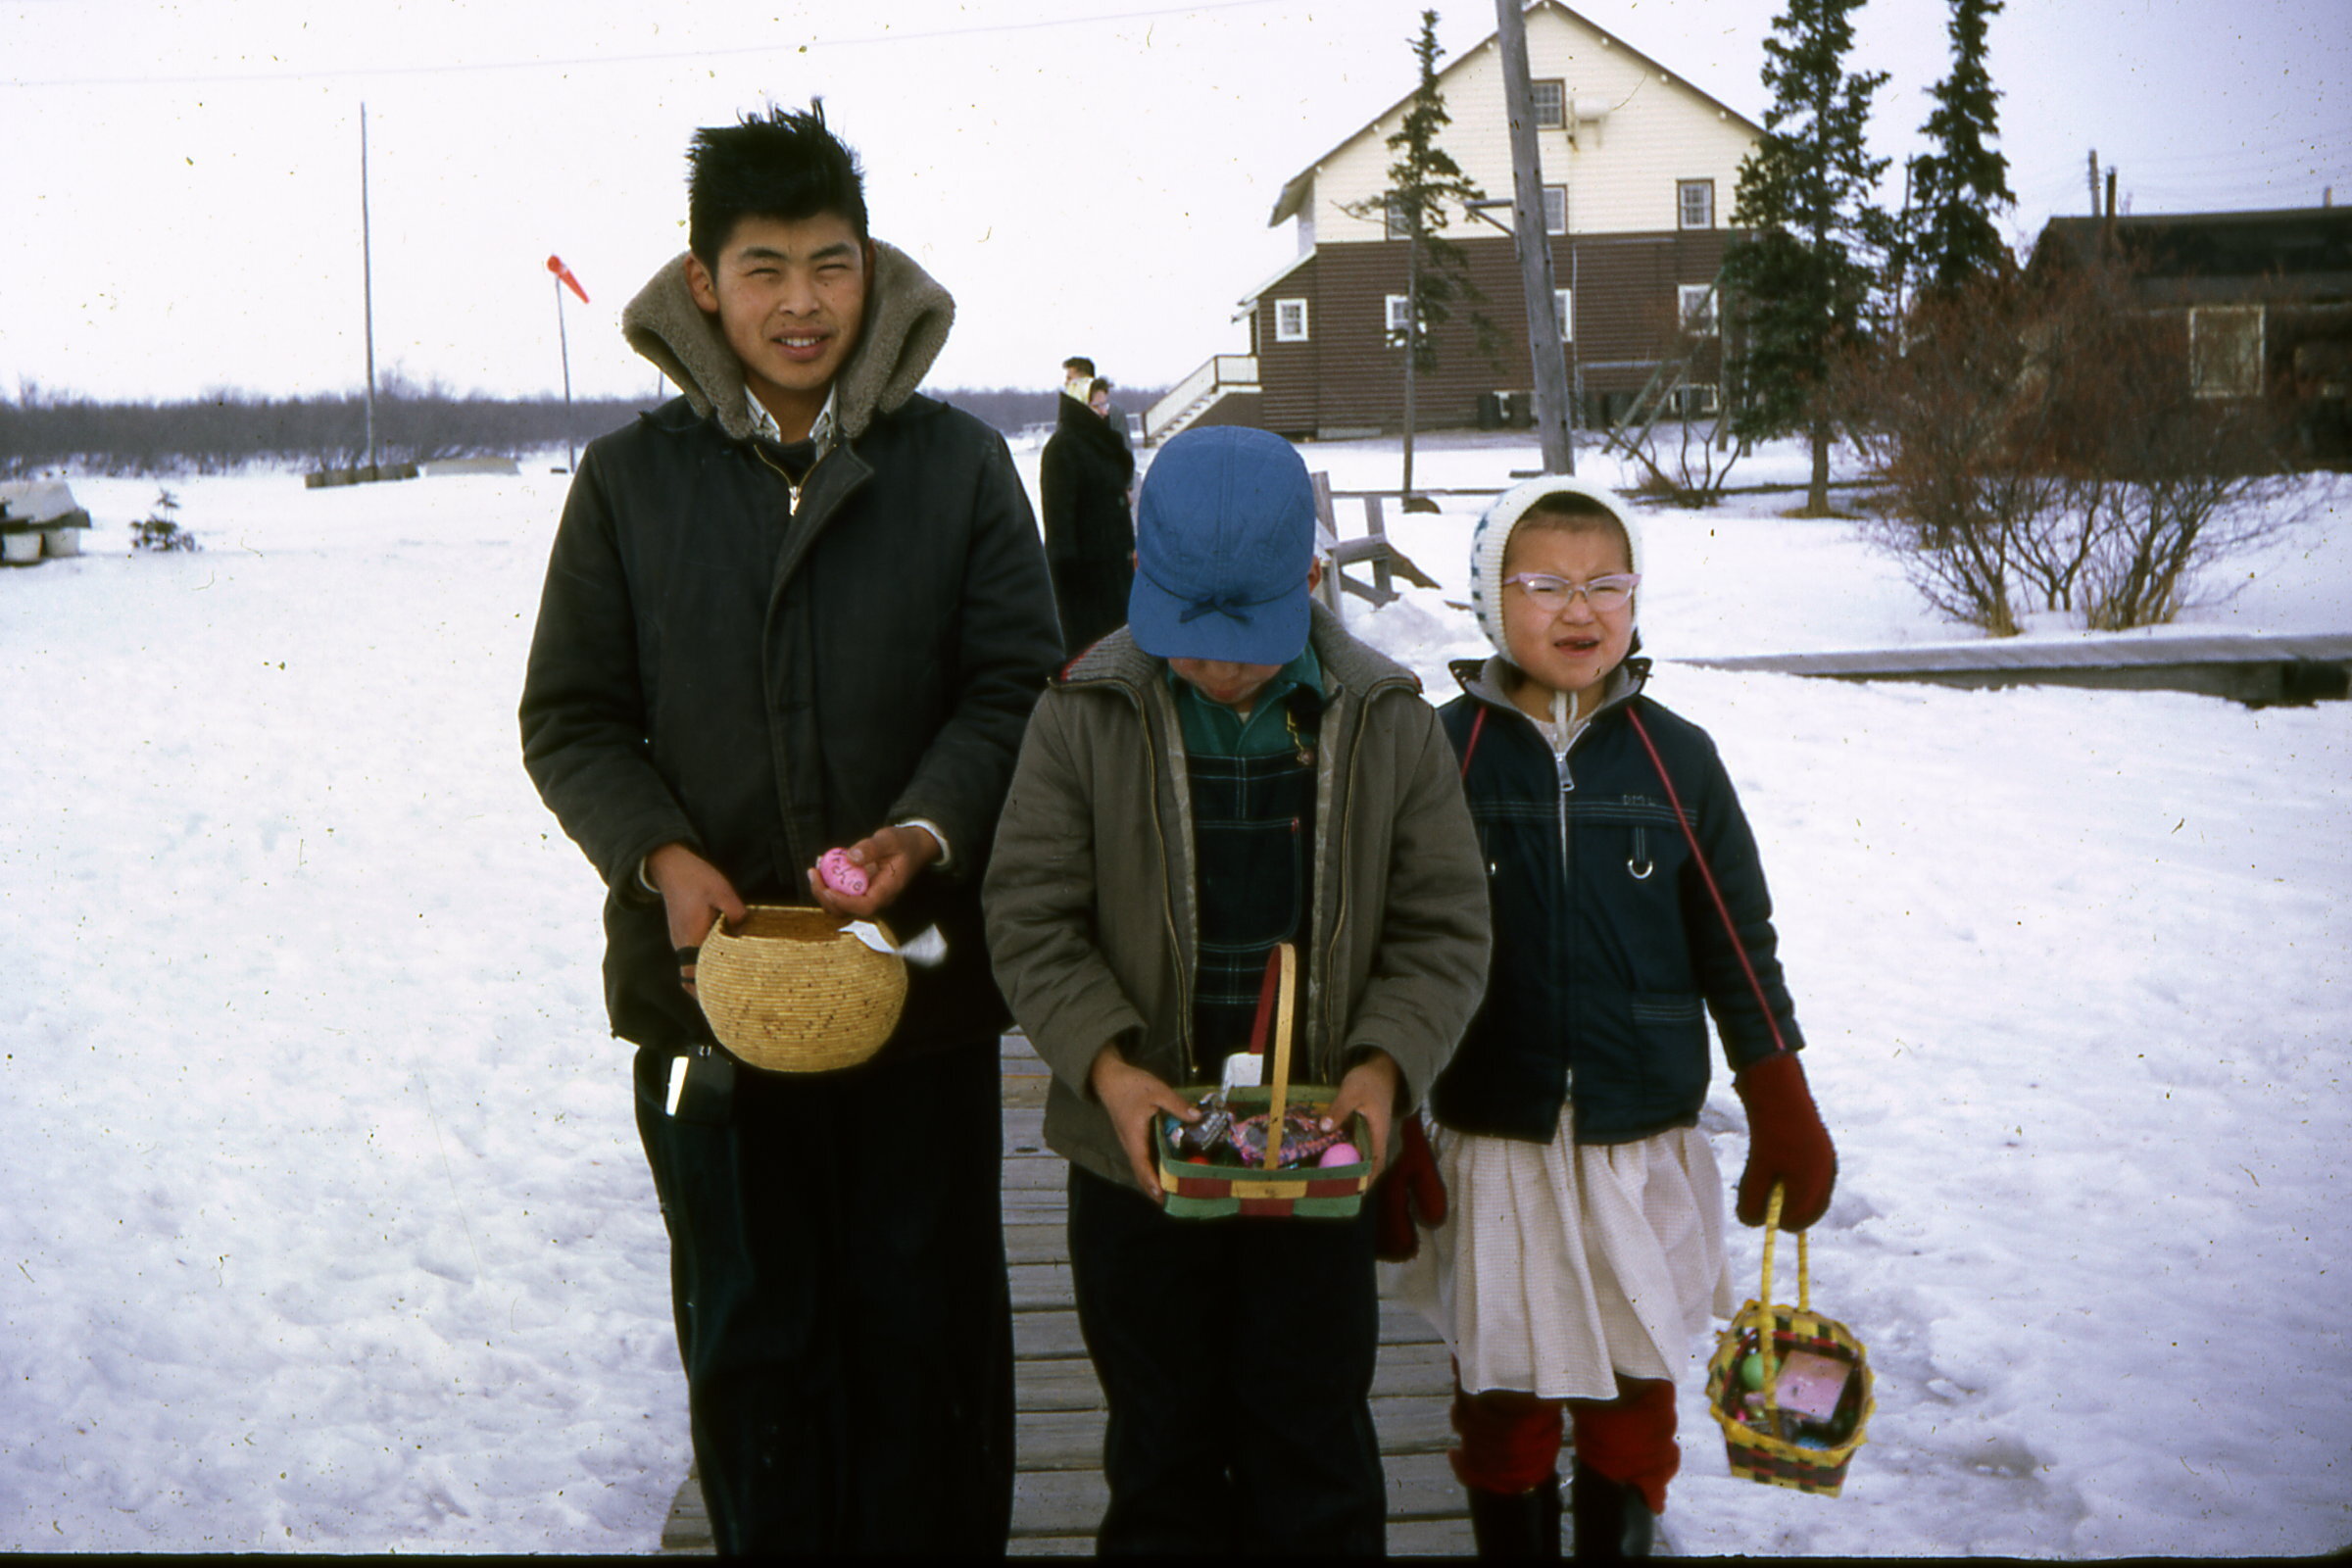 1967 Easter and kids with baskets.jpg